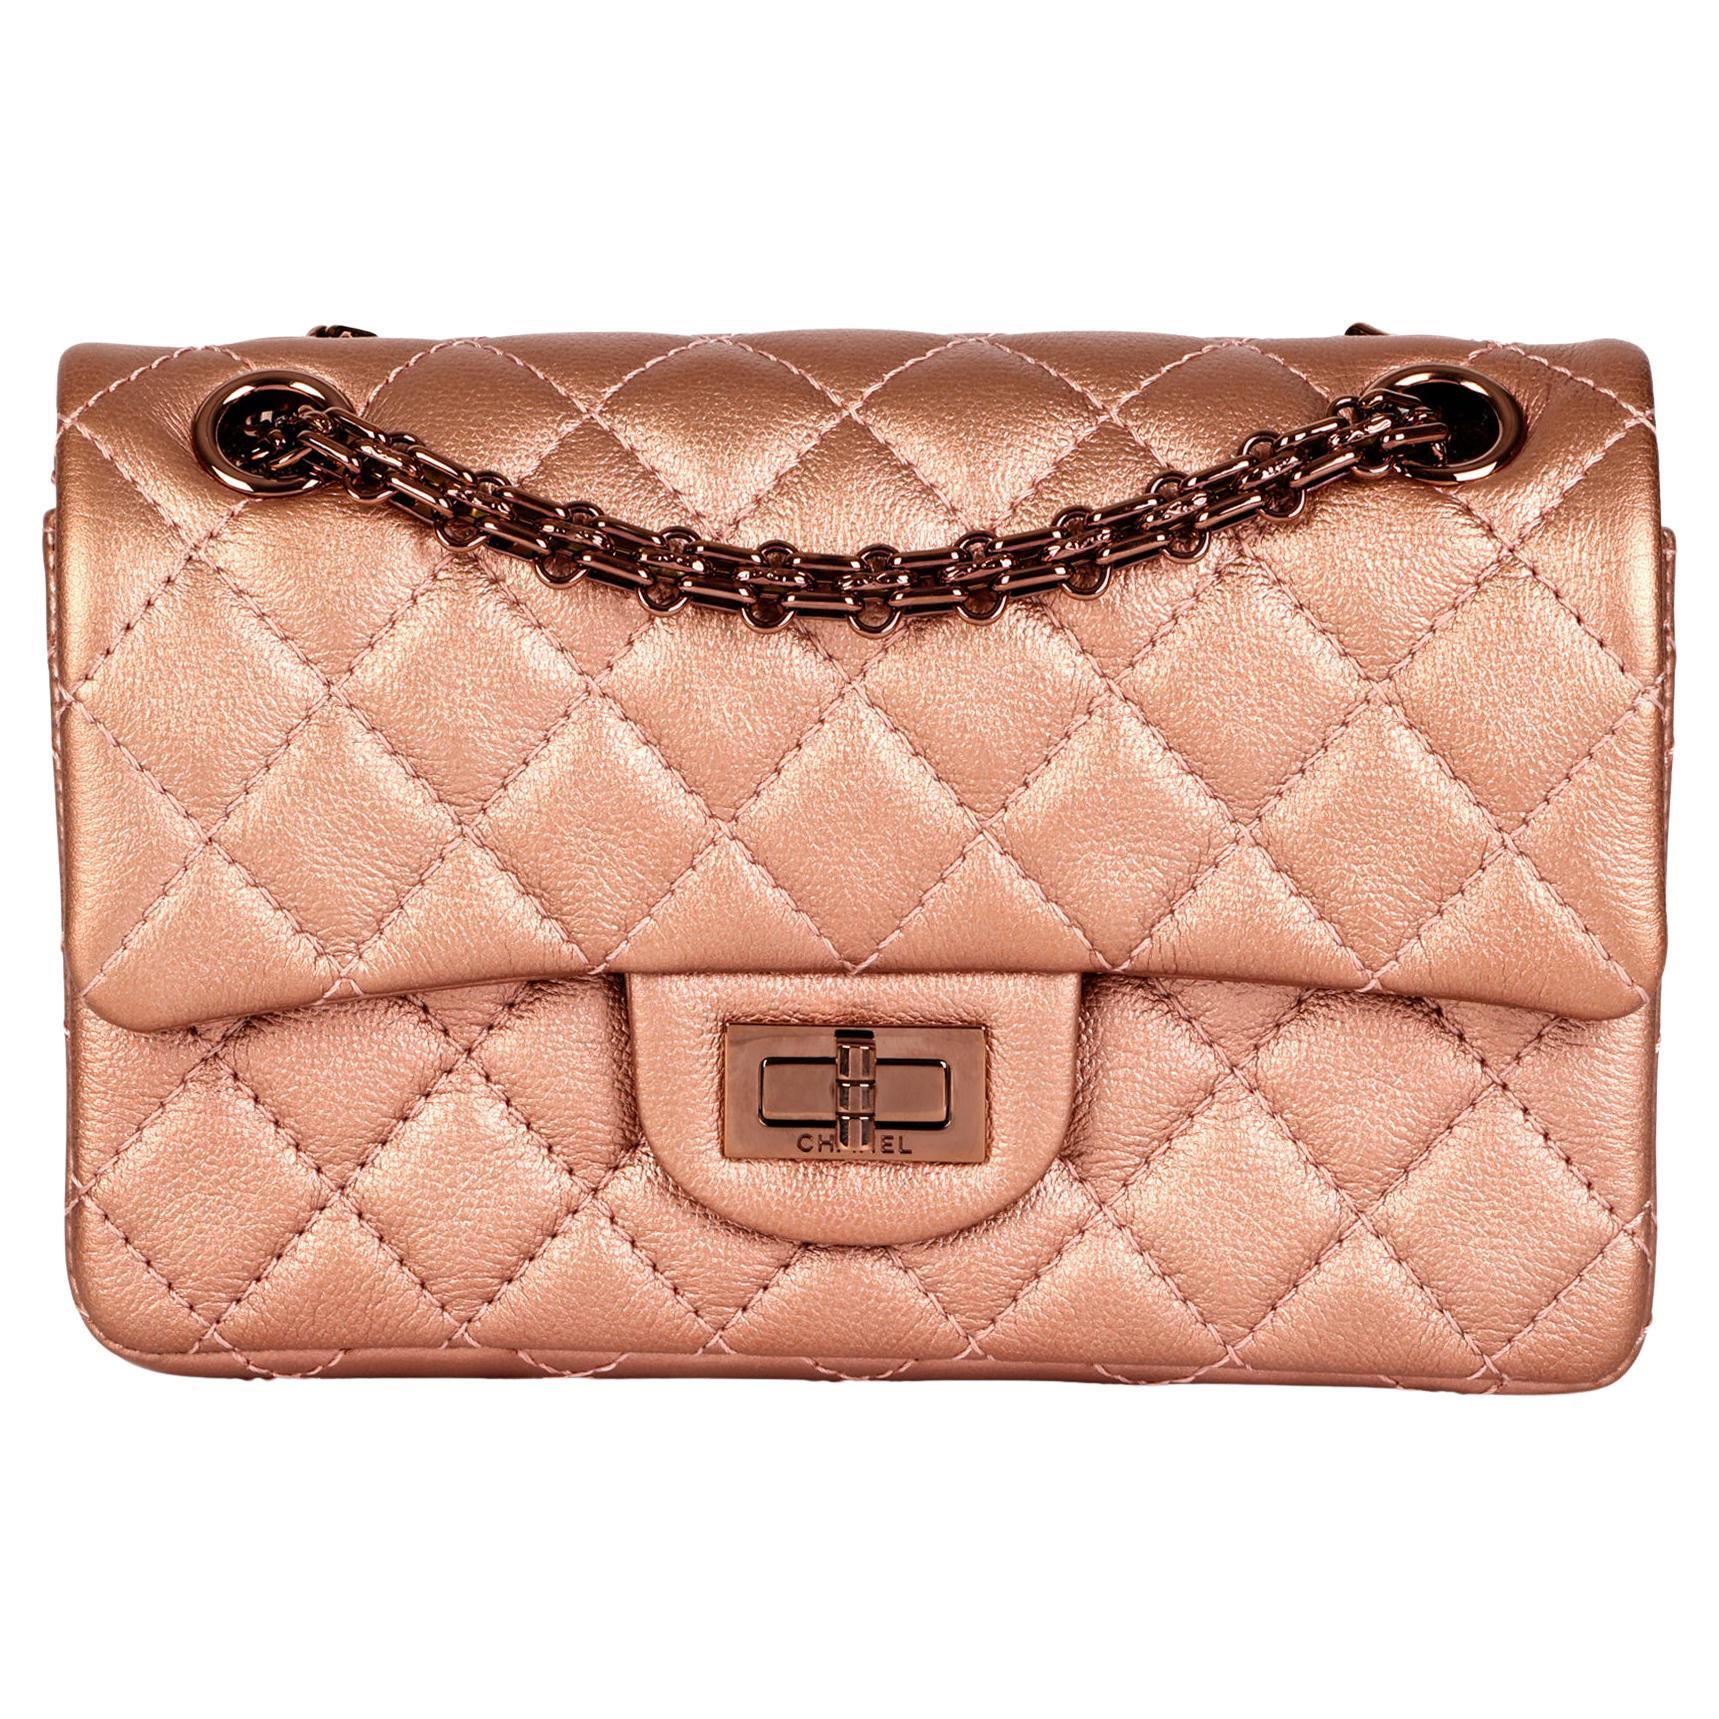 CHANEL Rose Gold Metallic Aged Calfskin Leather 224 2.55 Reissue Double  Flap Bag